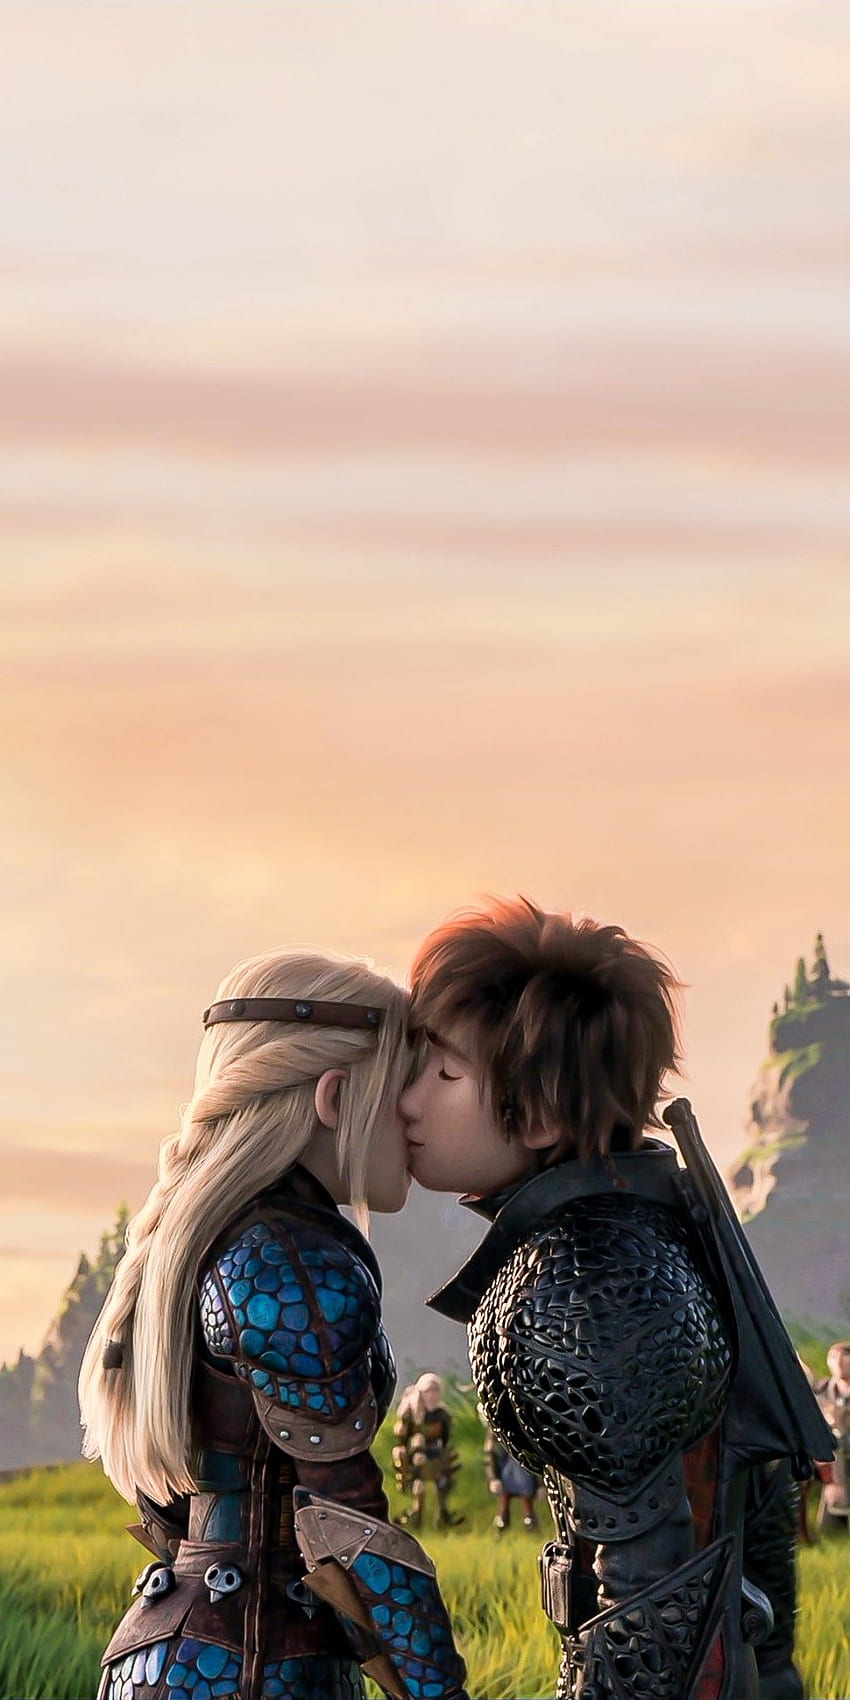 S2gg1 on 『 how to train your dragon 』. How train your dragon, How to train dragon, How to train your dragon, Hiccup and Astrid HD phone wallpaper